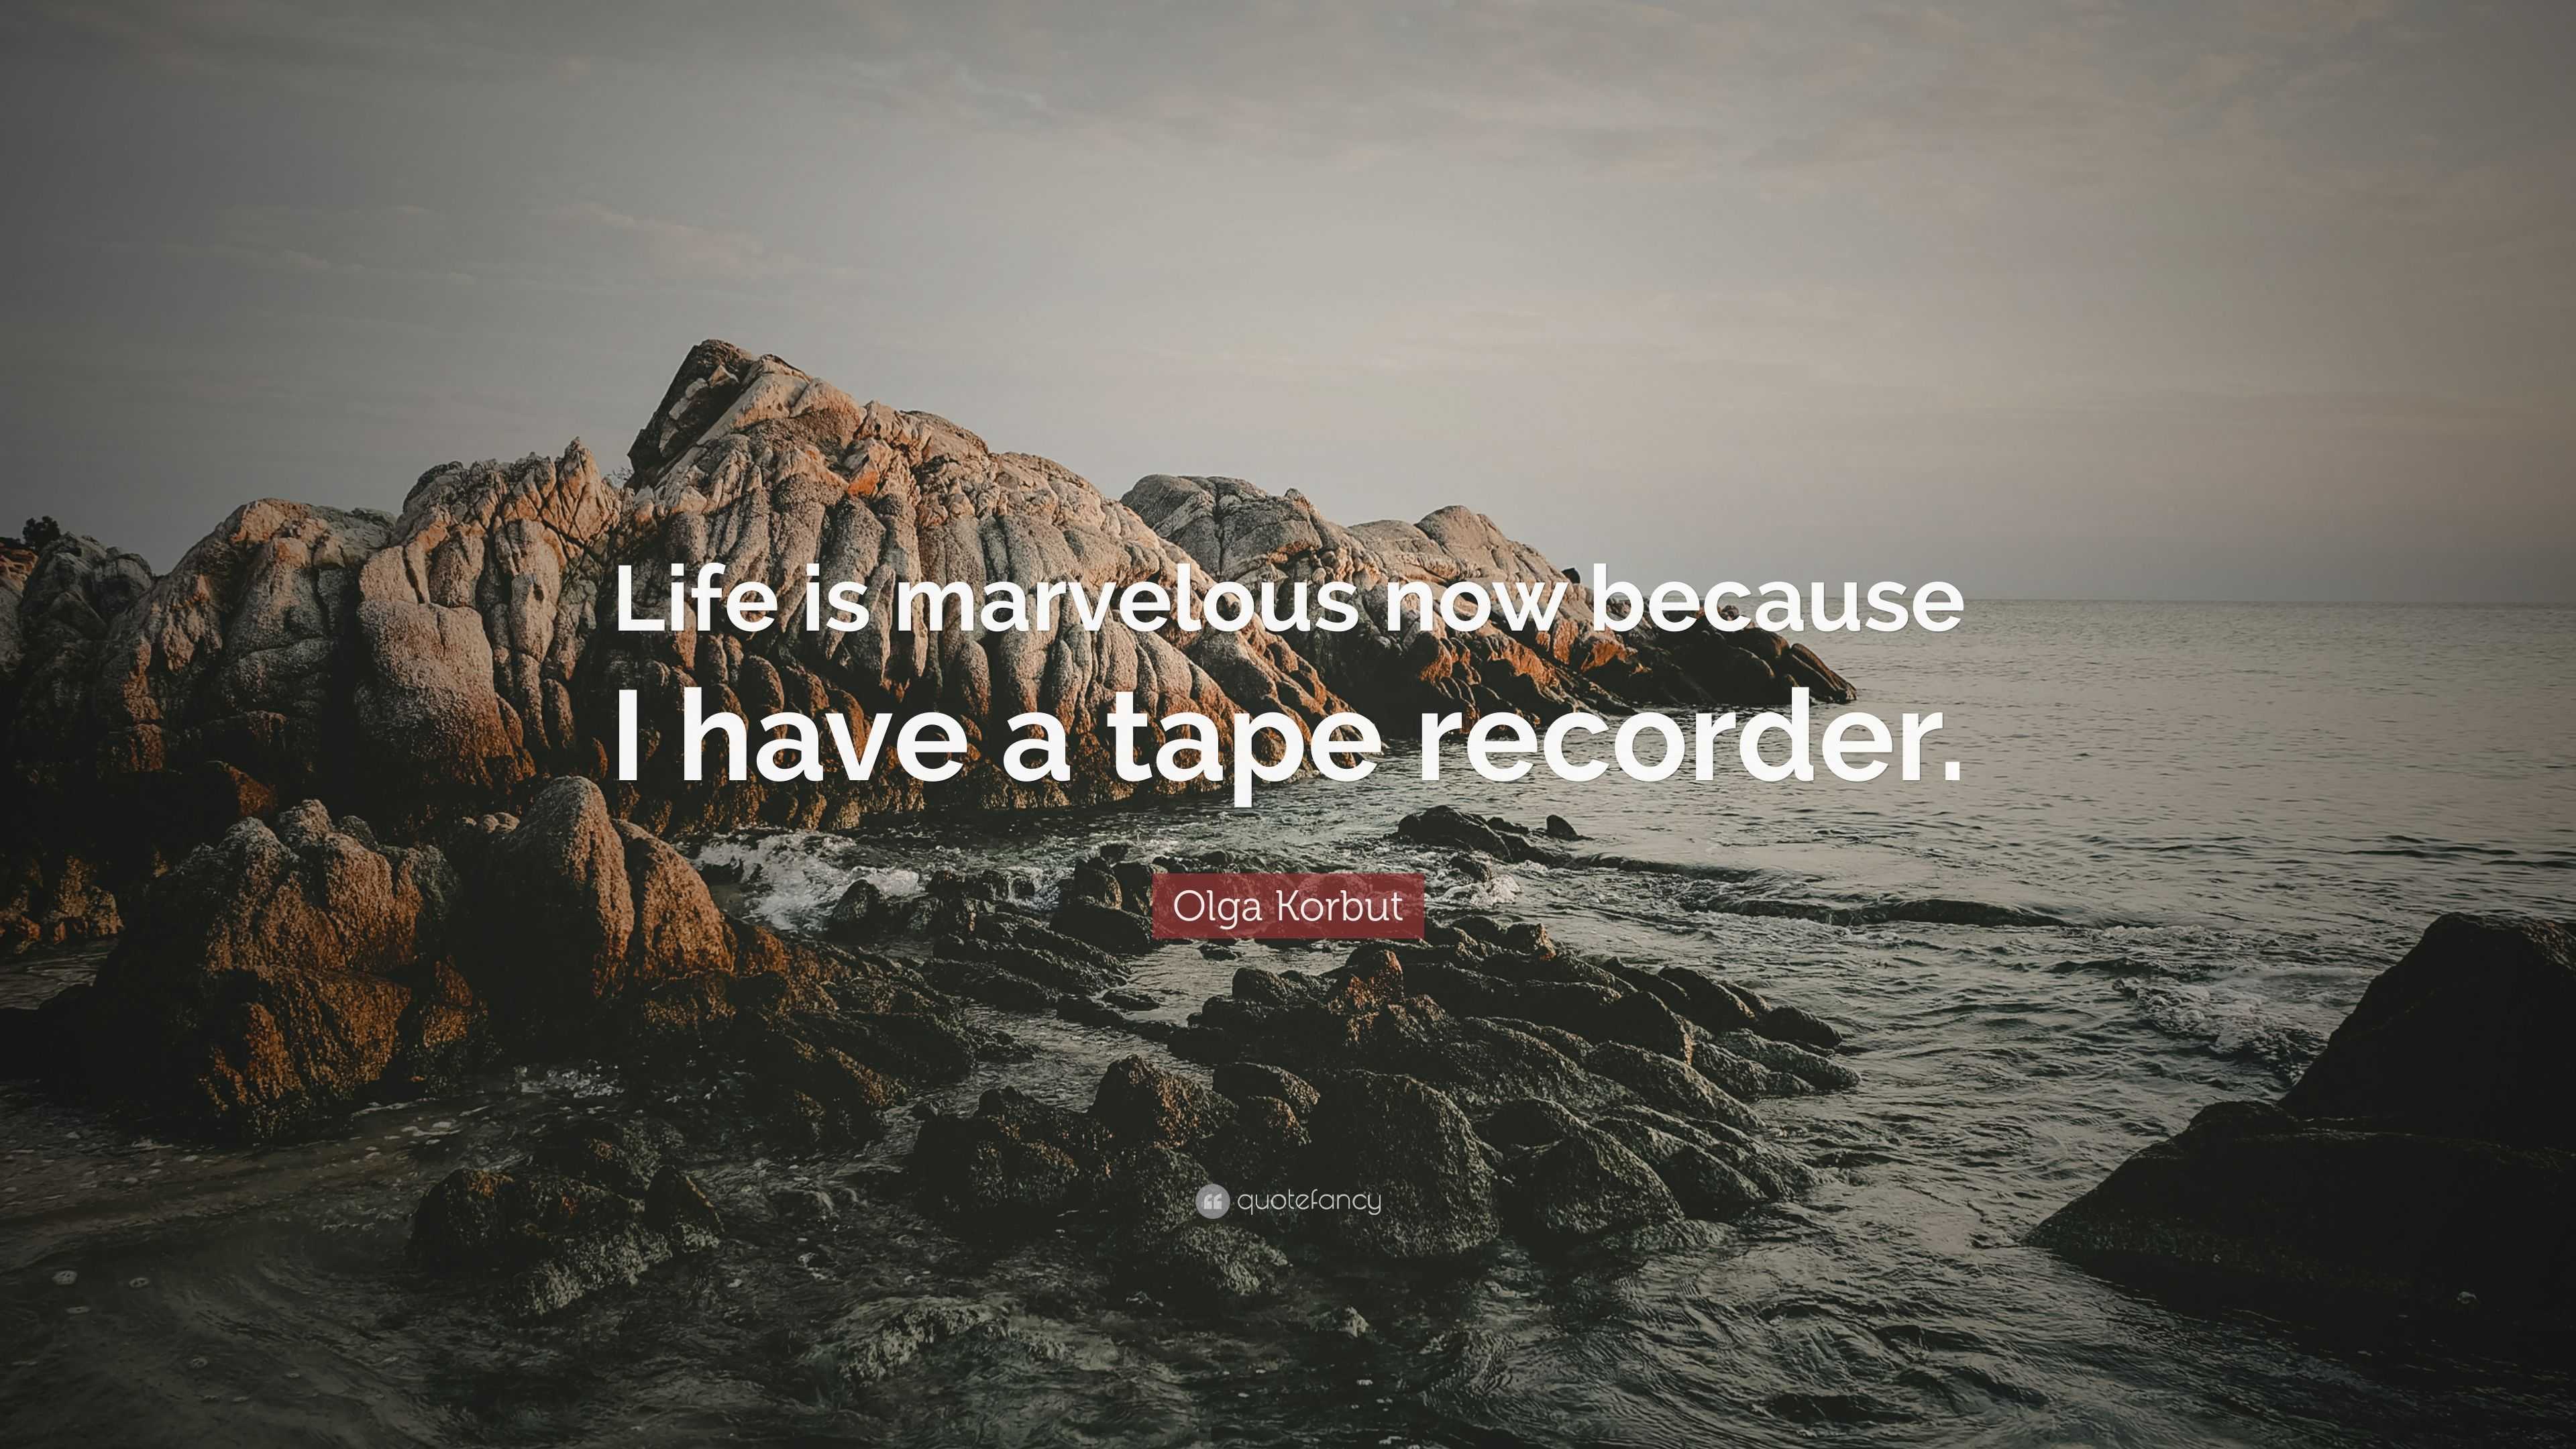 Olga Korbut Quote: “Life is marvelous now because I have a tape recorder.”